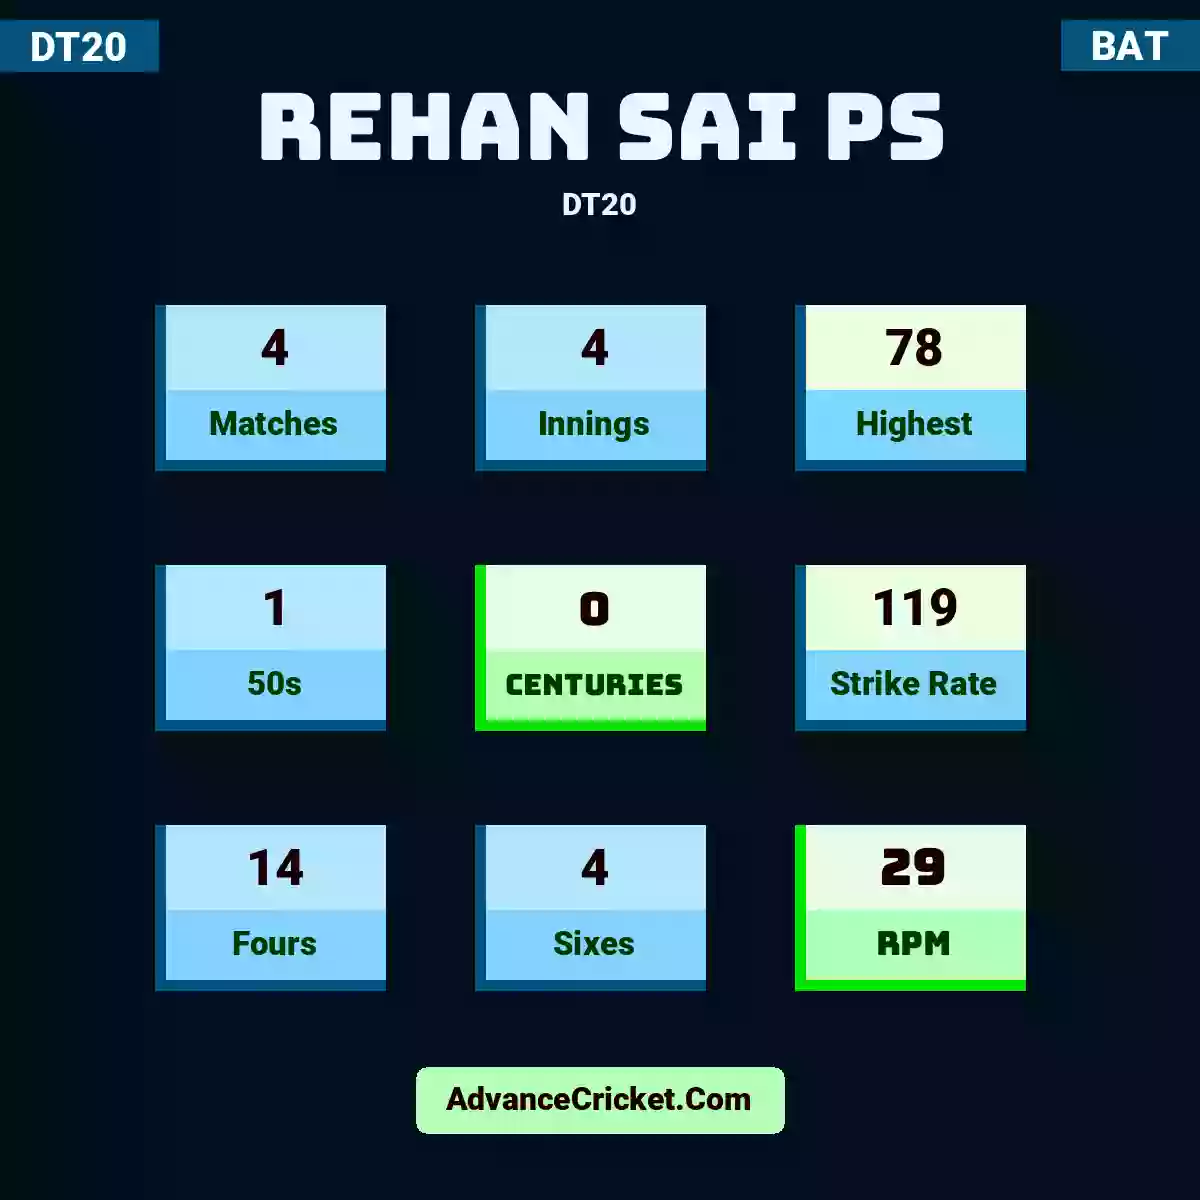 Rehan Sai PS DT20 , Rehan Sai PS played 4 matches, scored 78 runs as highest, 1 half-centuries, and 0 centuries, with a strike rate of 119. R.Sai.PS hit 14 fours and 4 sixes, with an RPM of 29.